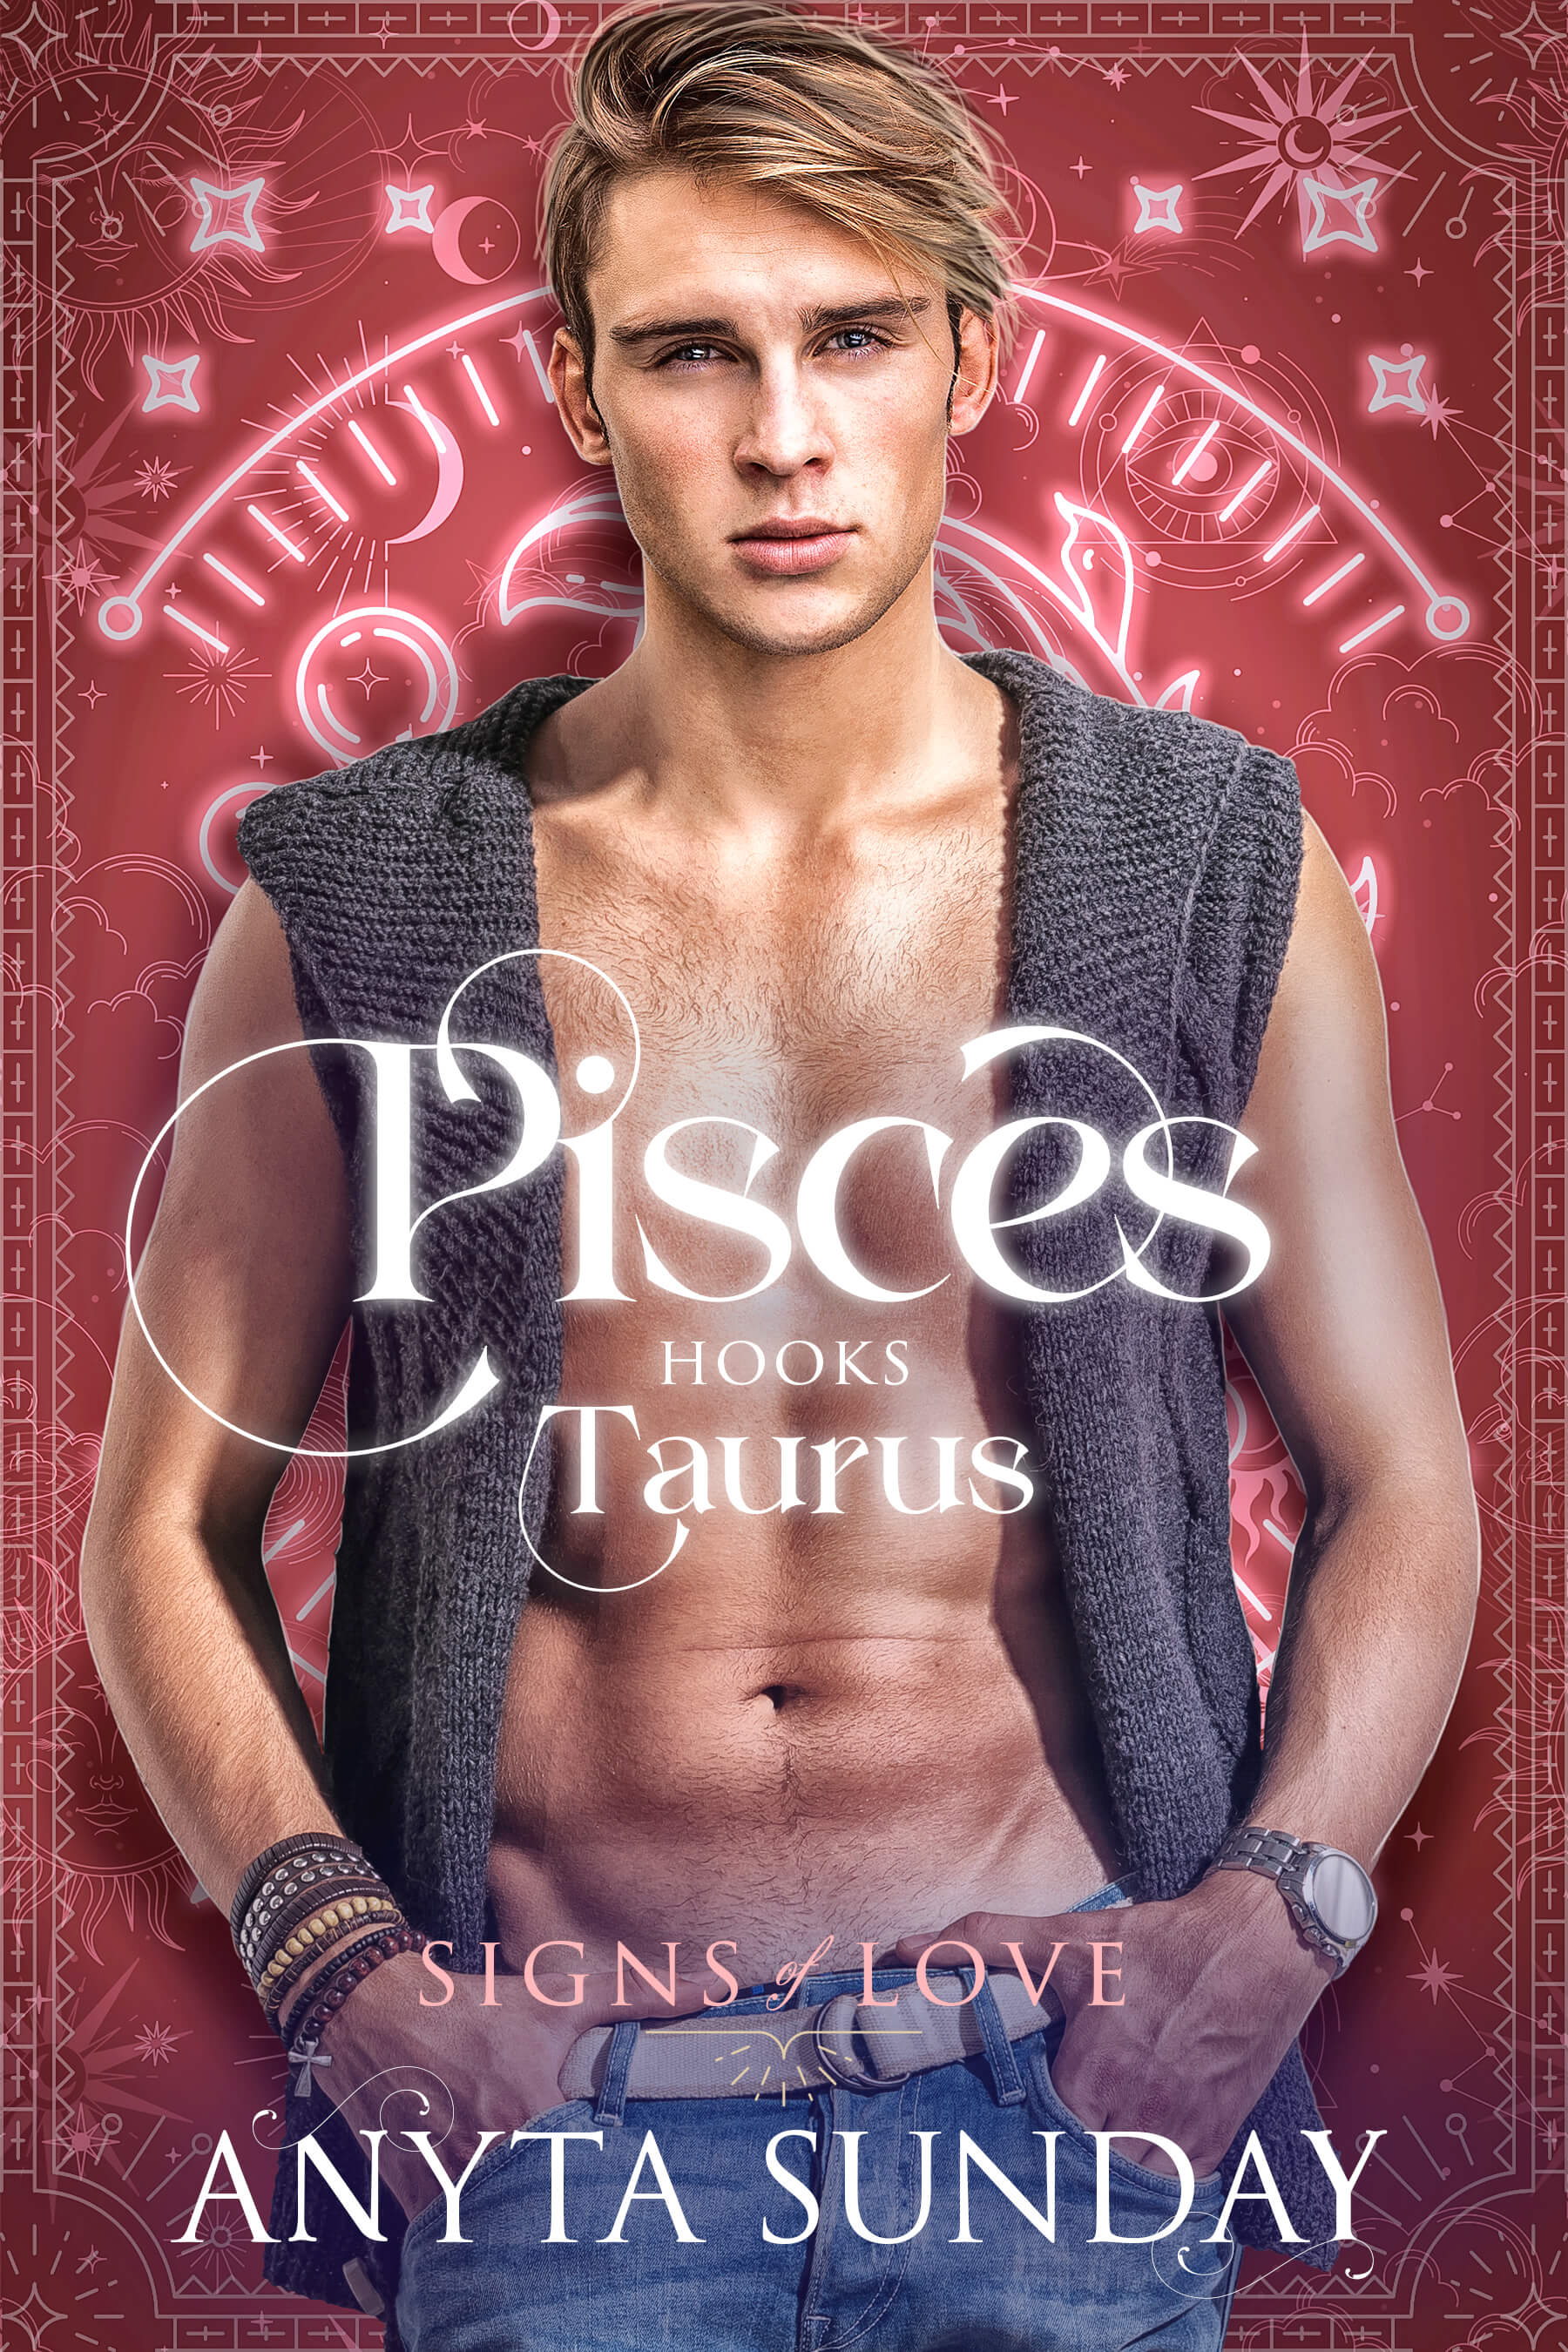 Pisces Hooks Taurus Cover Image - Gay Romance by Anyta Sunday